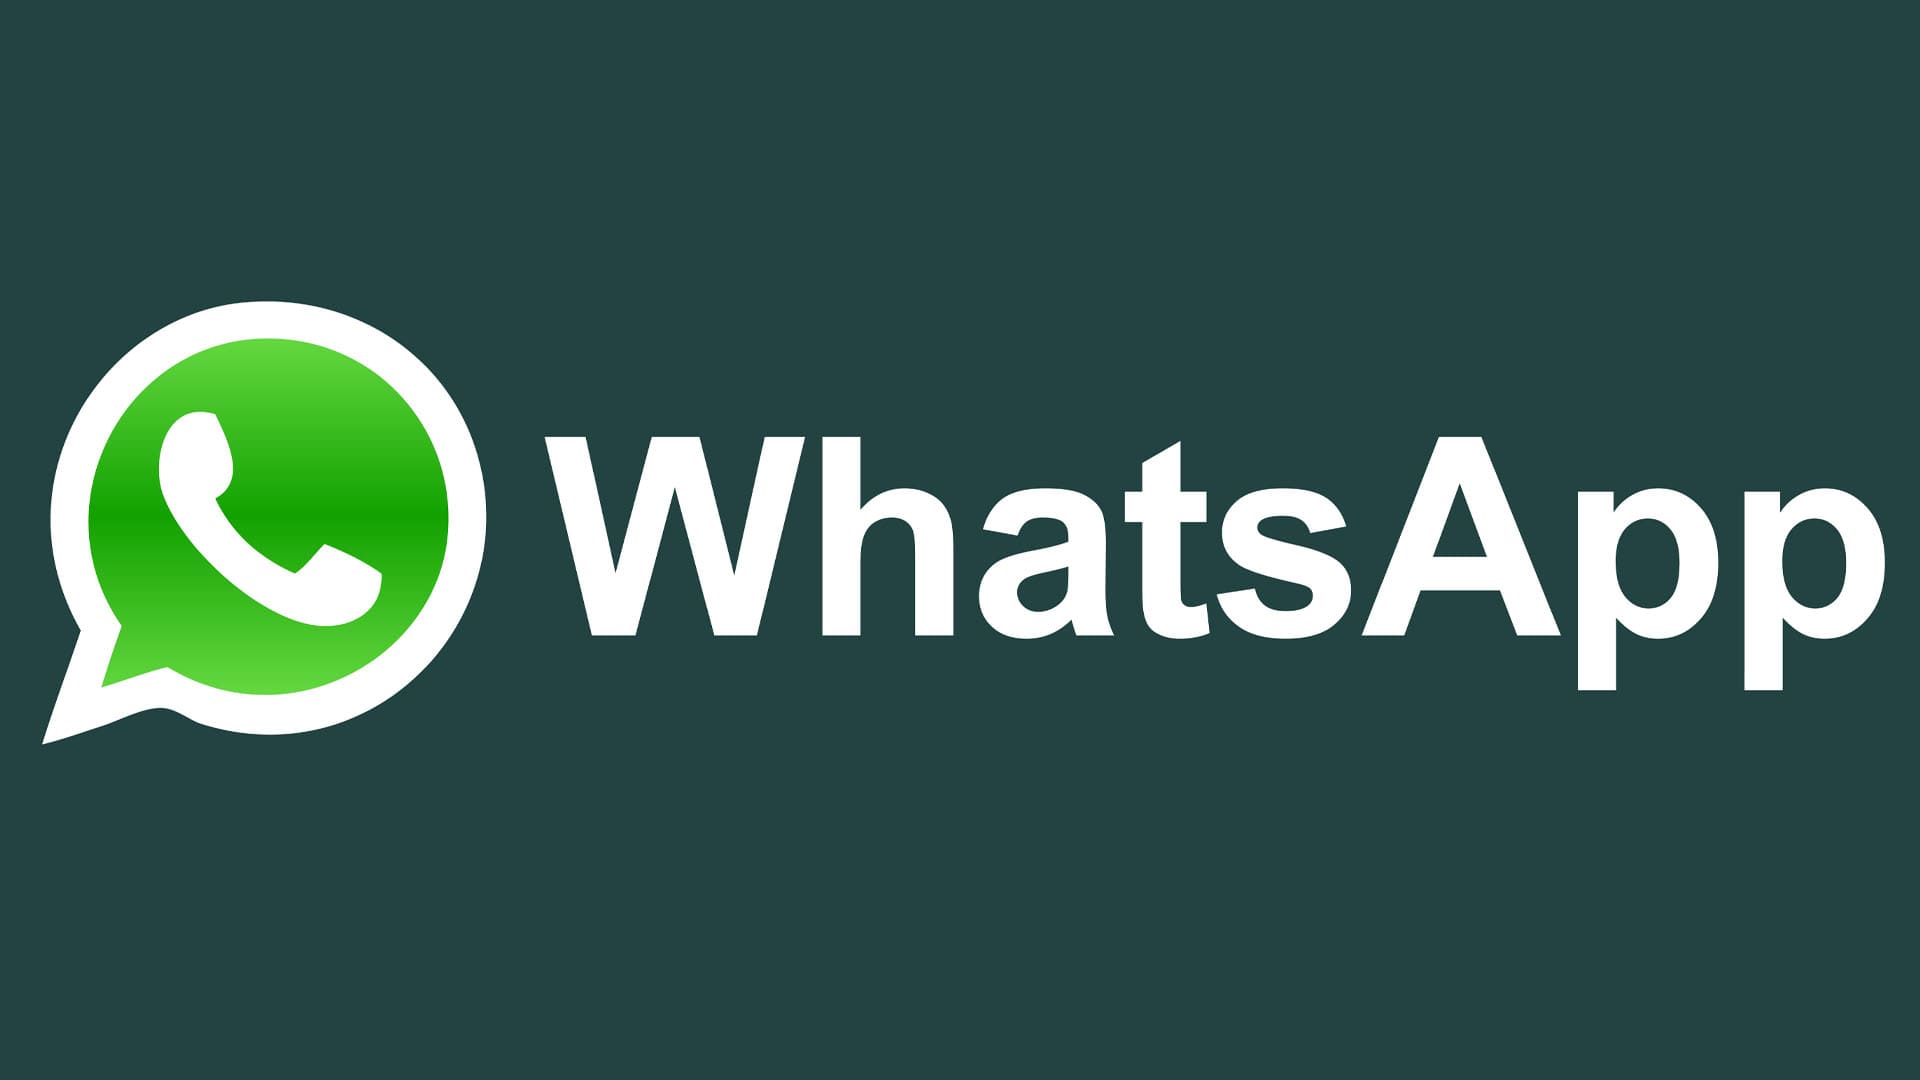 delete old WhatsApp database backup without affecting the chat